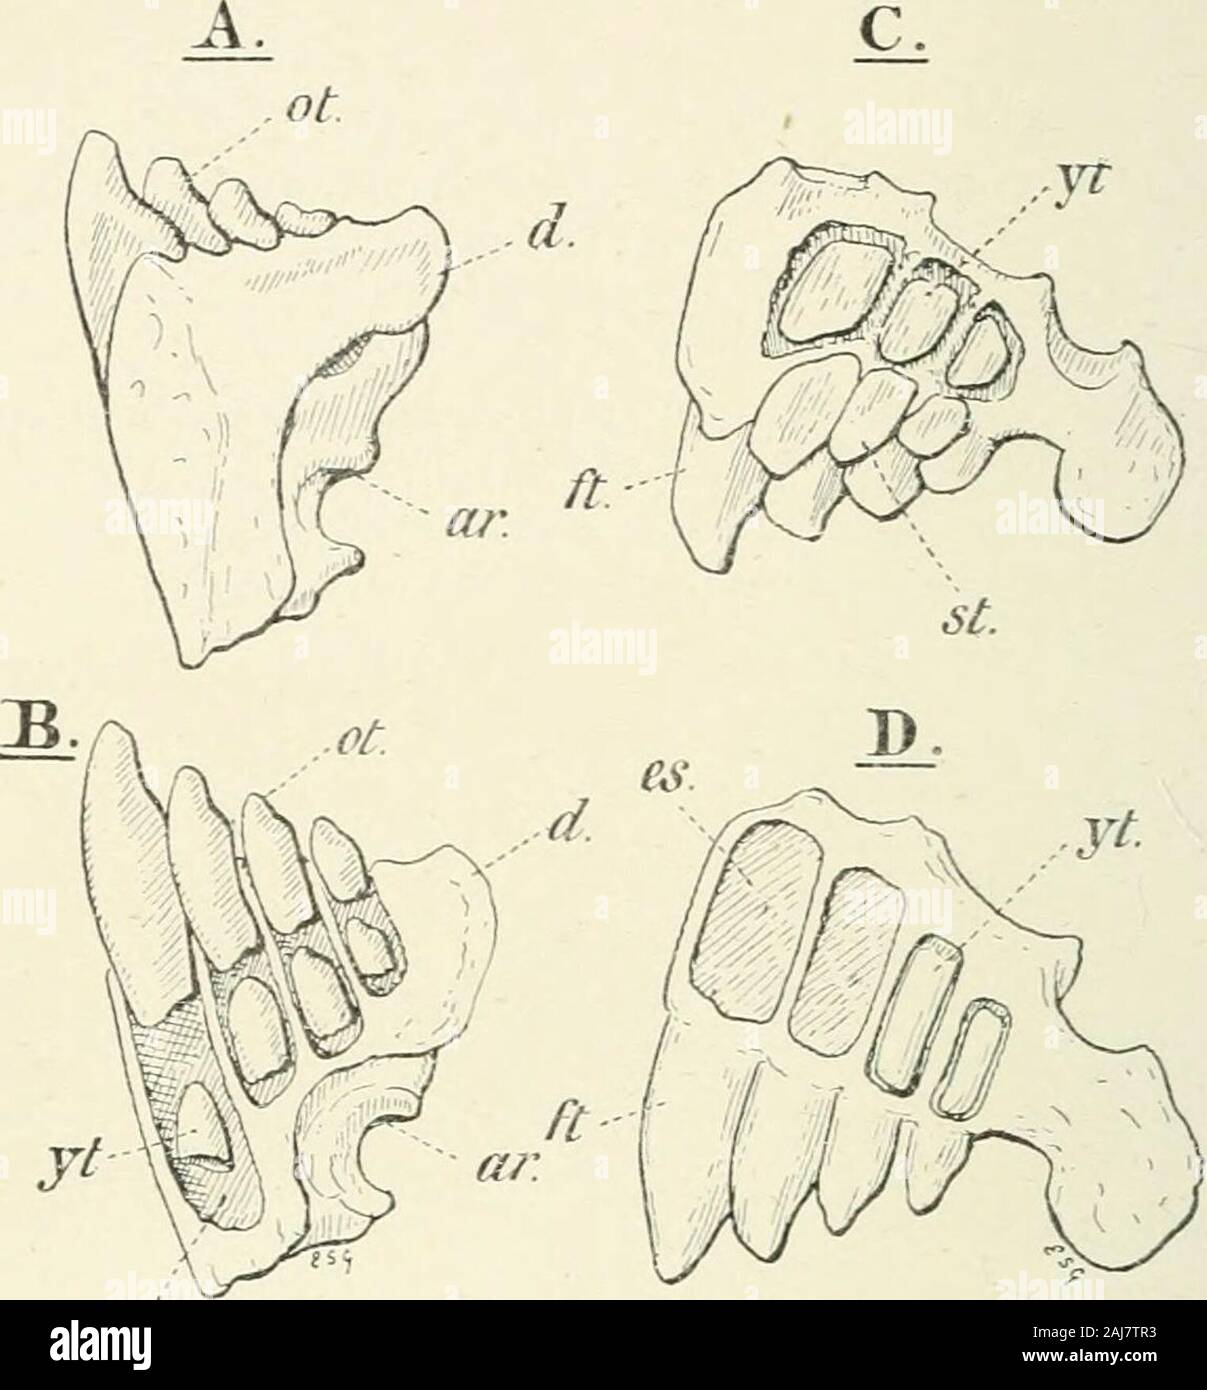 A treatise on zoology . recirostris, T. and S. (Aftci- Hay, Fishes of India.) Family Balistiuae. The Trigger-Fishes have two or three dorsalspines, and generally large scales or scntes. Acanthoderma, Ag. ; Oligocene, Europe. Ikdistes, Cuv. (Figs. 448-9) ;Parahdercs, Blkr. ; Alutere.-^, Cuv. ; P&ilocephalus, Sw.—warm seas. Family Monacanthidae. The File-Fishes have one strong dorsalspine, and generally a second vestigial spine behind it. The pelvic finis vestigial or absent. The body is covered with small spiny scales. Monacanthus, Cuv. (Fig. 450). Series 2. (Ostracodermi). There is no spinous Stock Photo